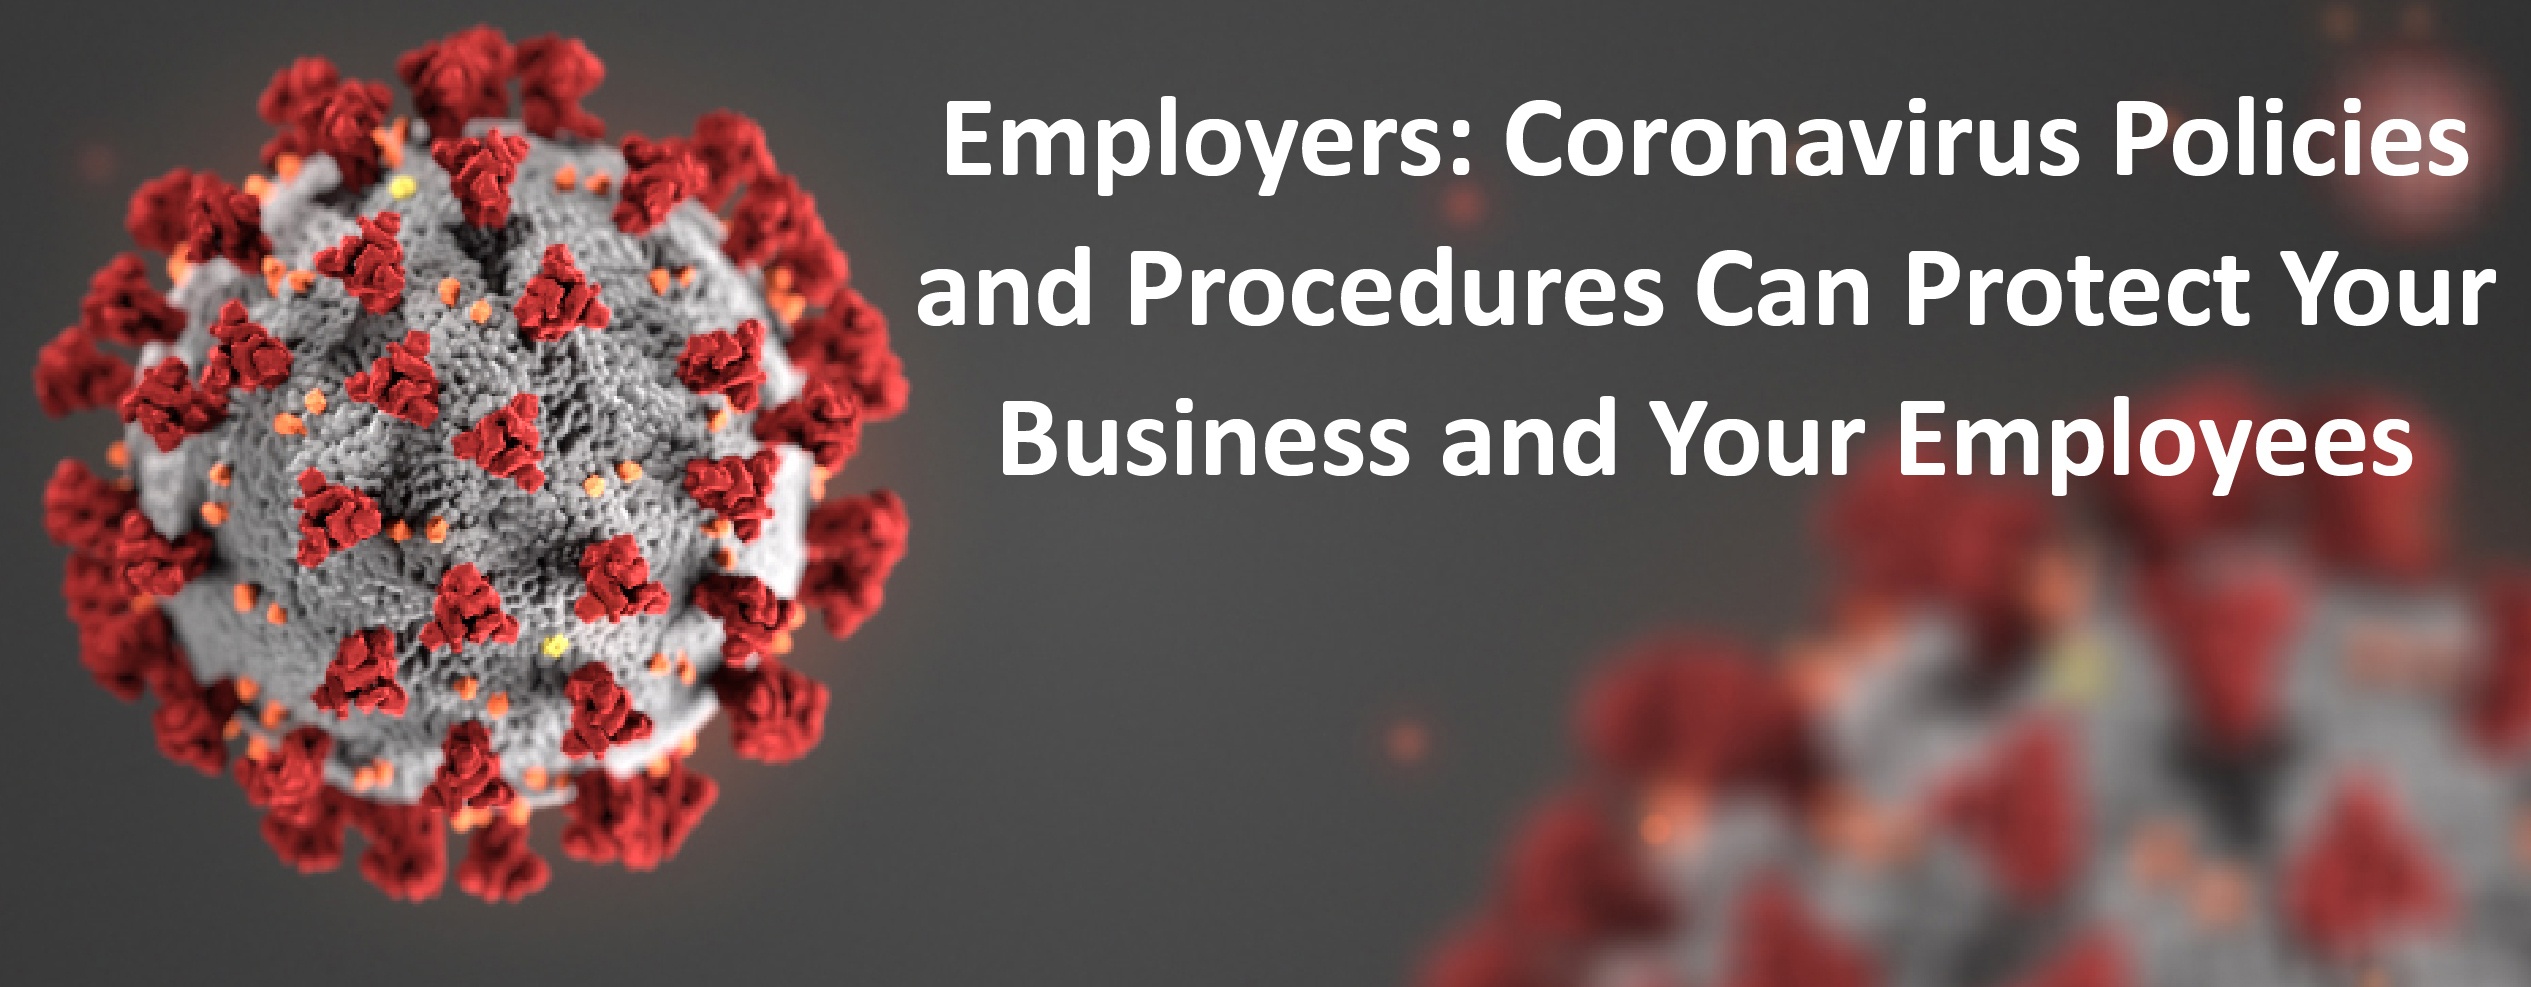 Employers Coronavirus Policies and Procedures Can Protect